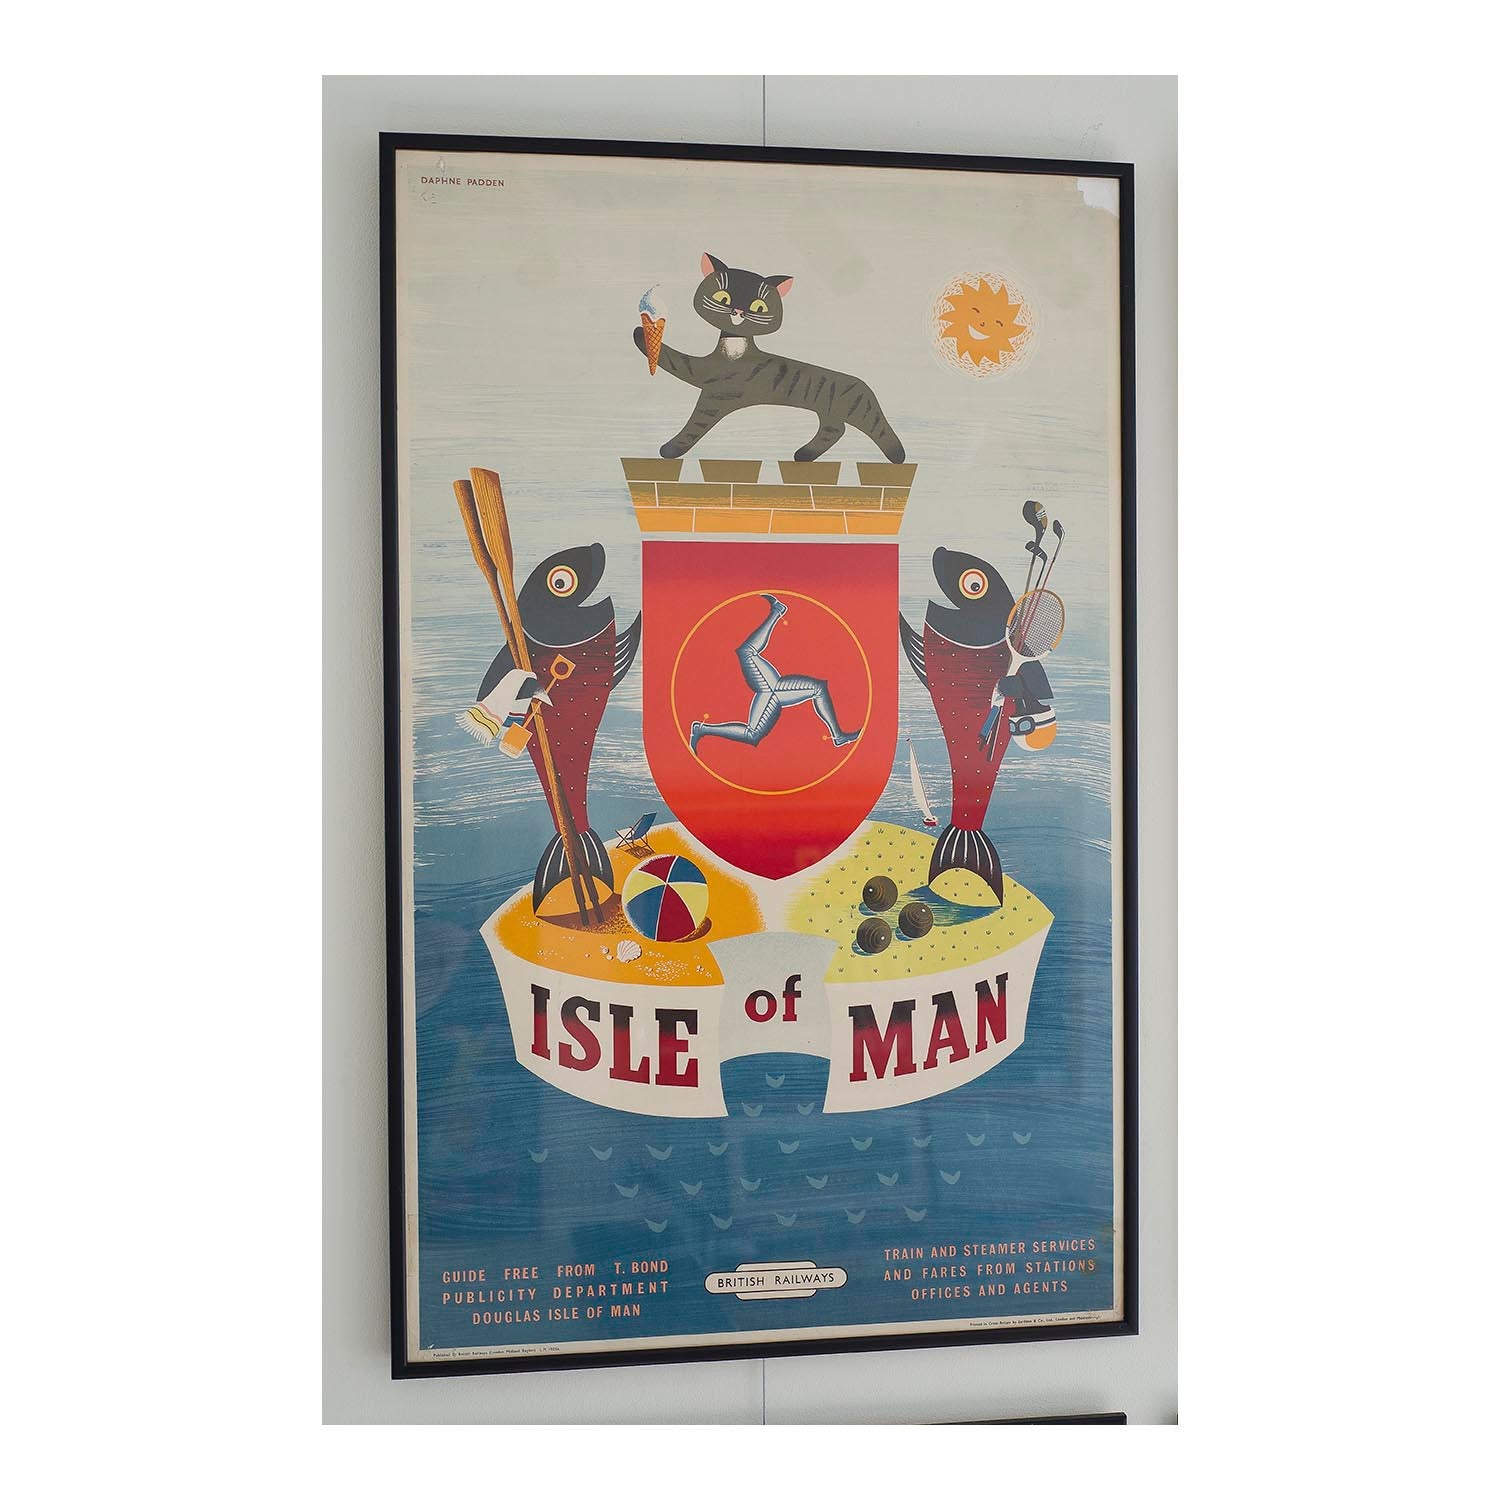 Original railway poster Isle of Man by Daphne Padden. Comical version of island’s crest, depicting holiday making fish and a Manx cat holding an ice cream